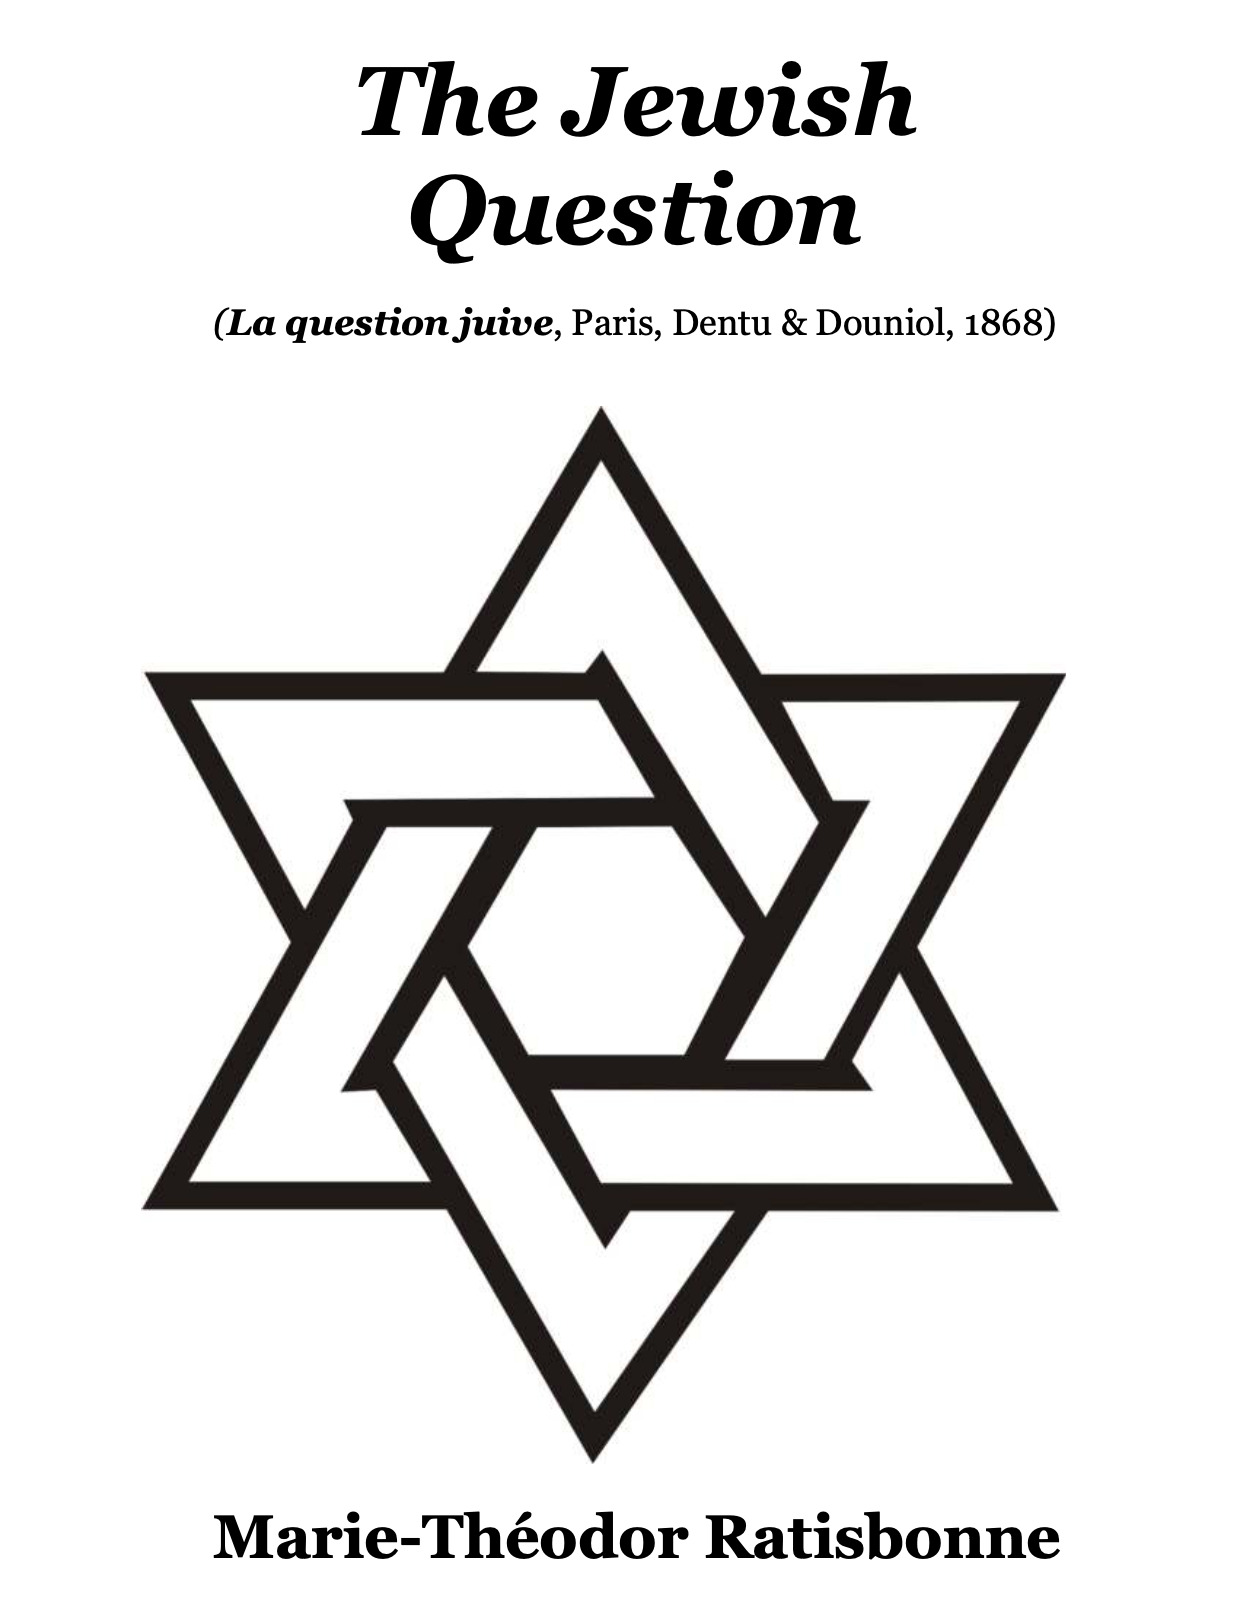 The Jewish Question (1868) by Marie Theodor Ratisbonne